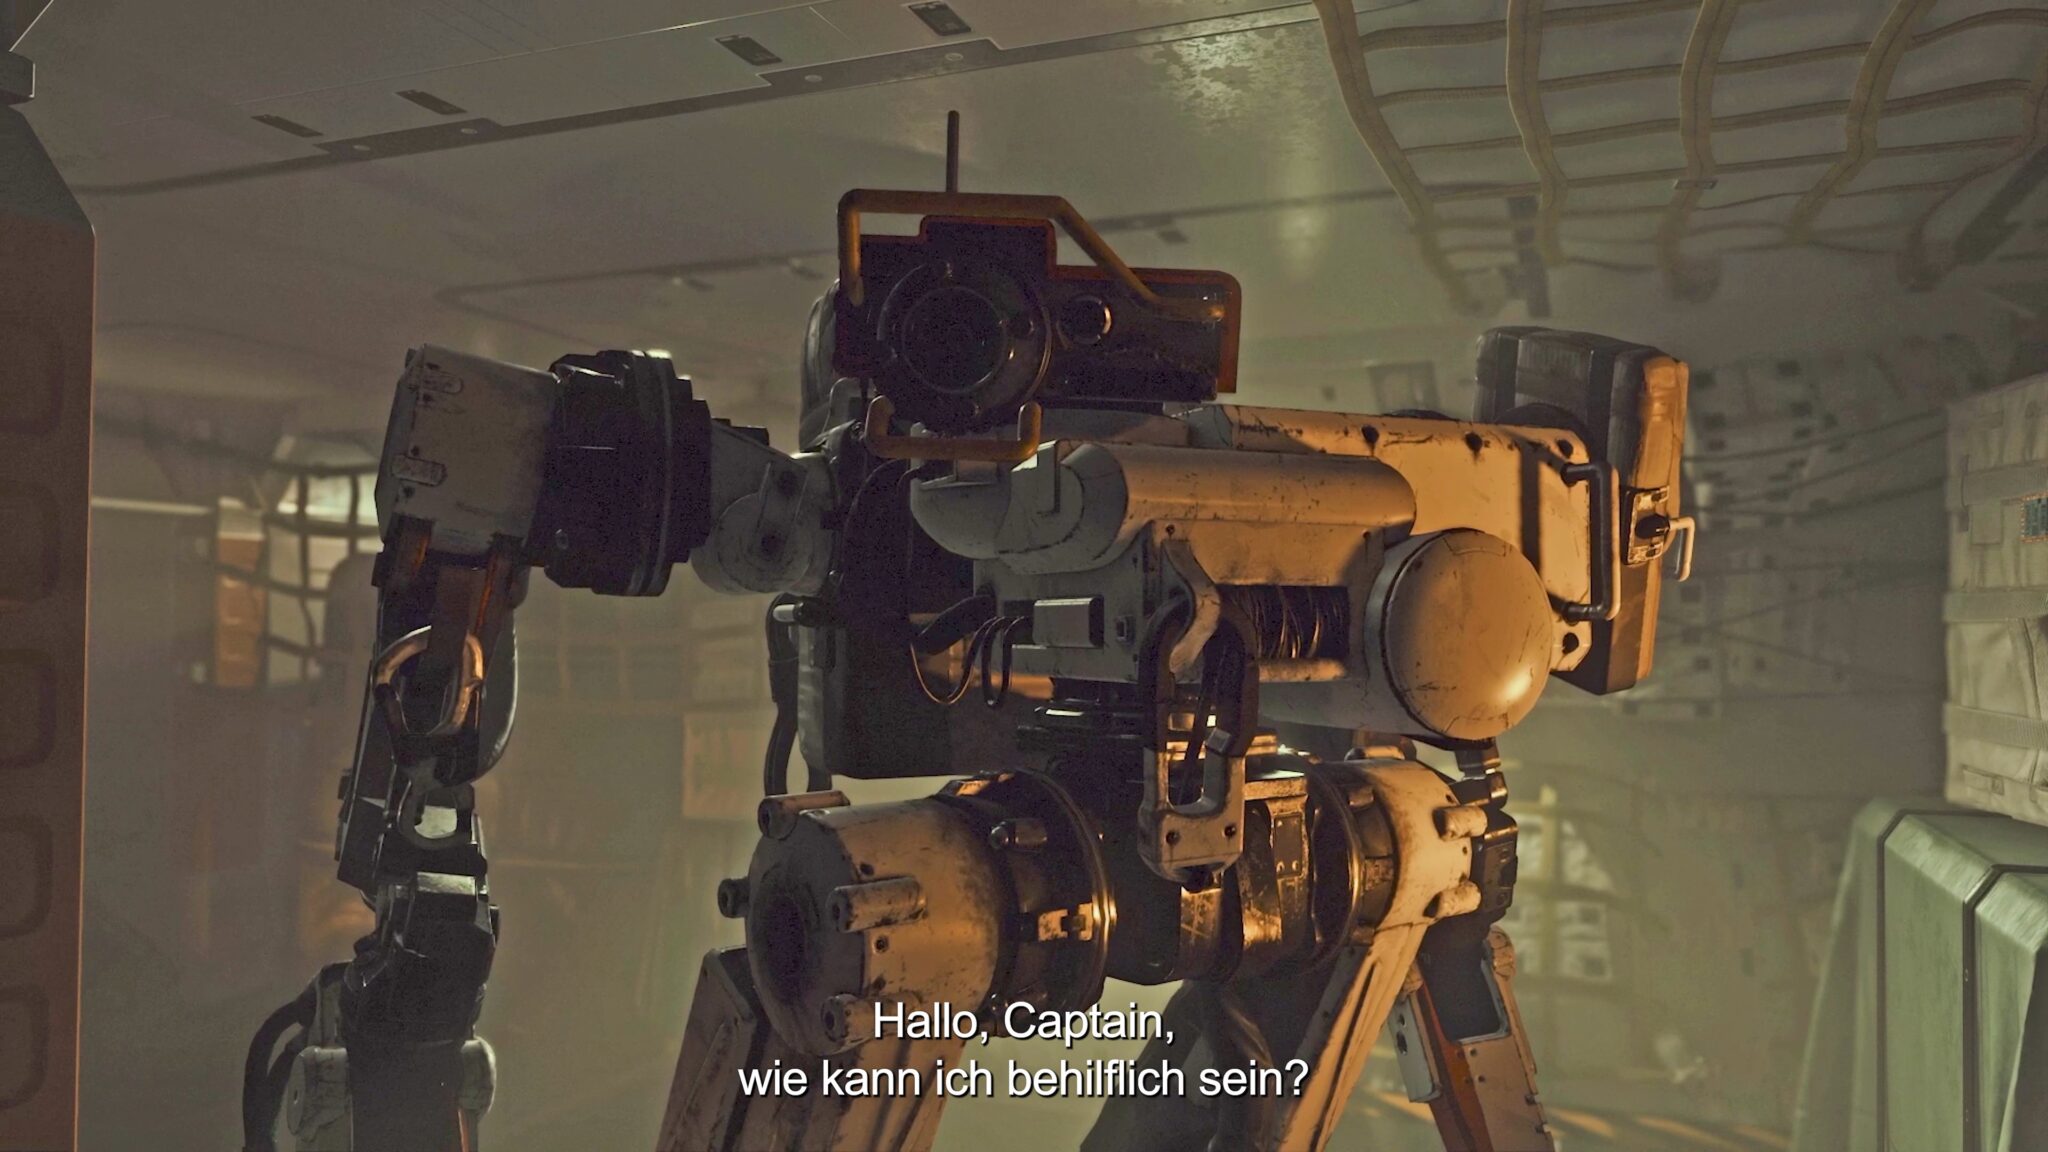 The robot is one of your possible companions in Starfield.